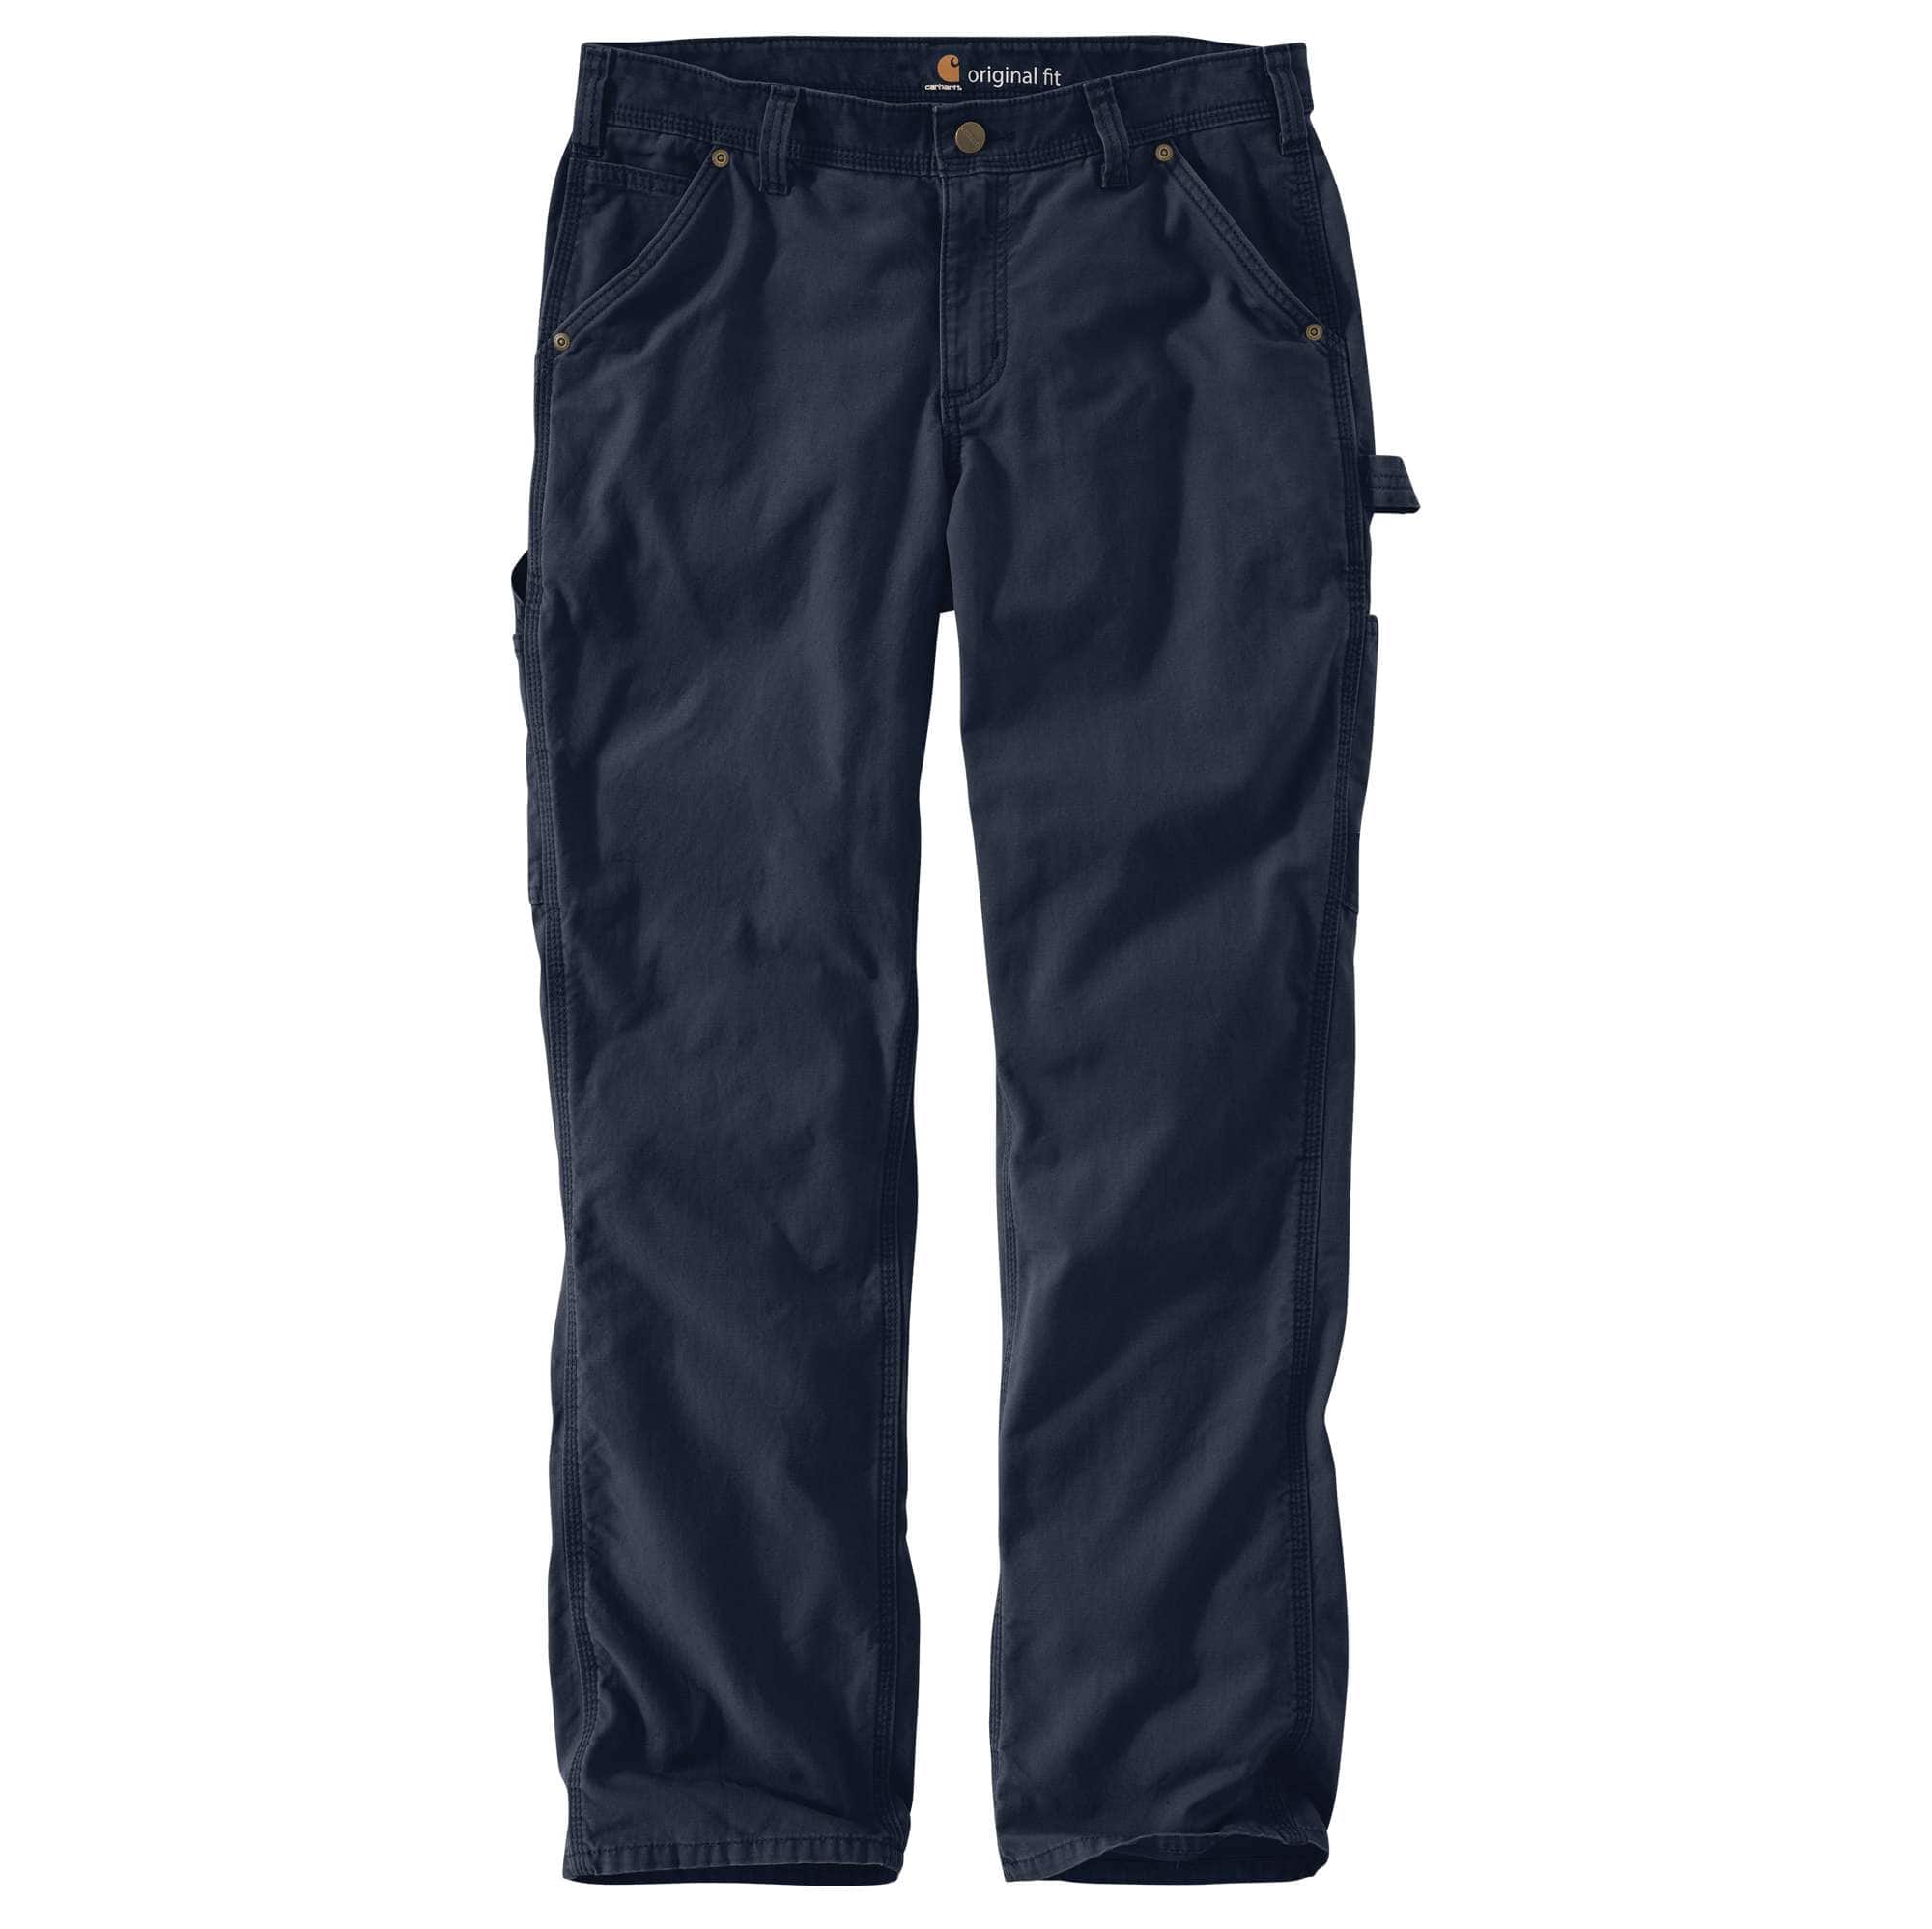 Carhartt pants available for wholesale! Our customers are loving